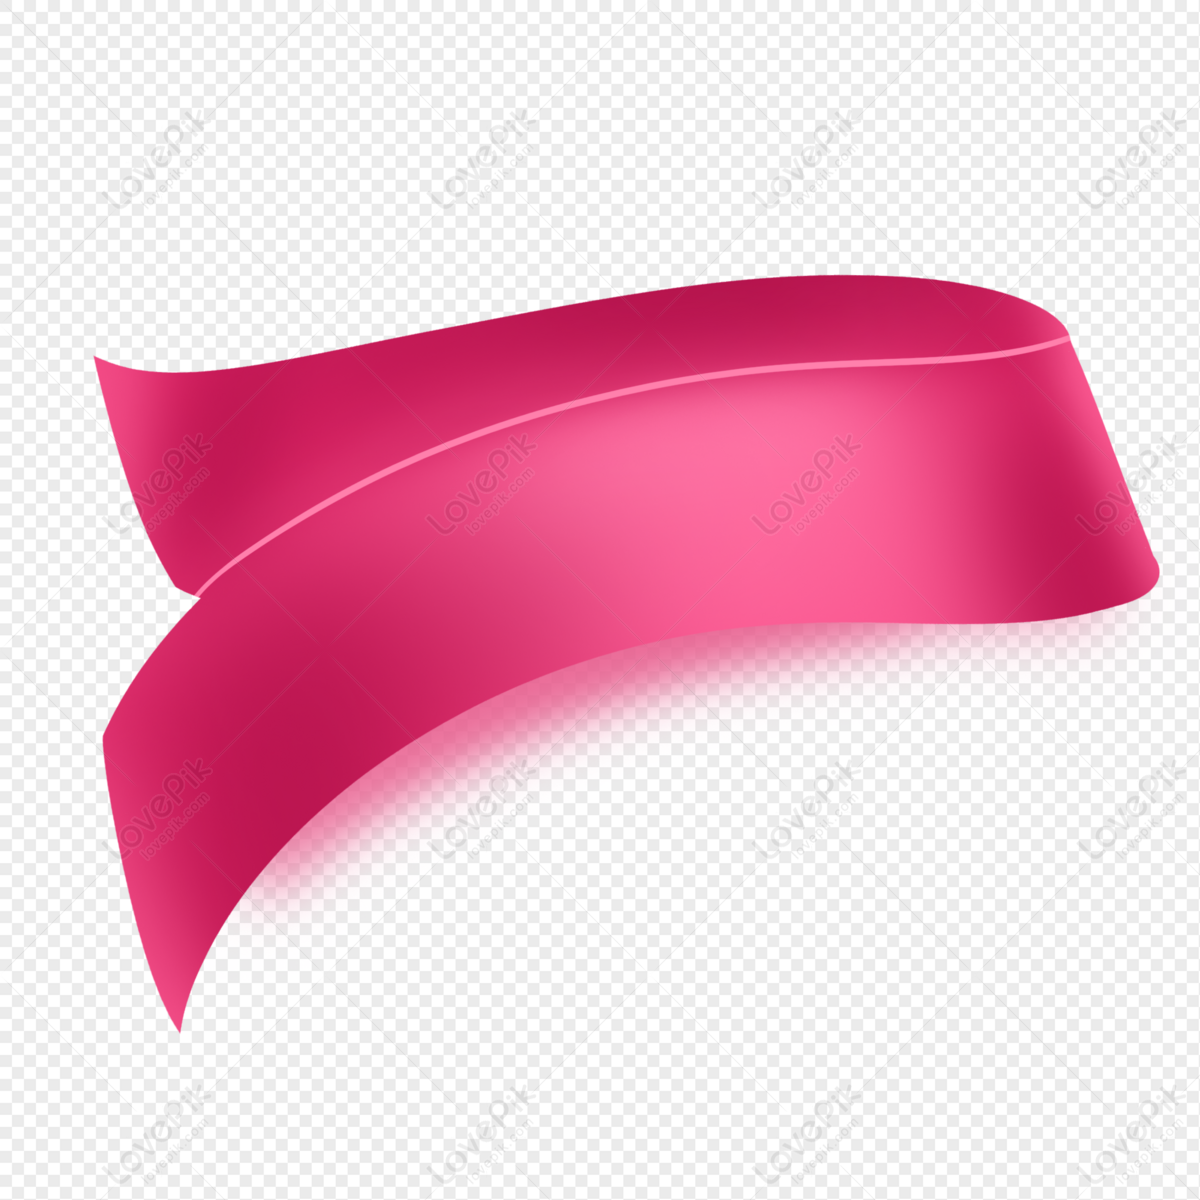 Pink Label, Labels, Pink Tag, Streamers PNG Transparent Image And Clipart  Image For Free Download - Lovepik